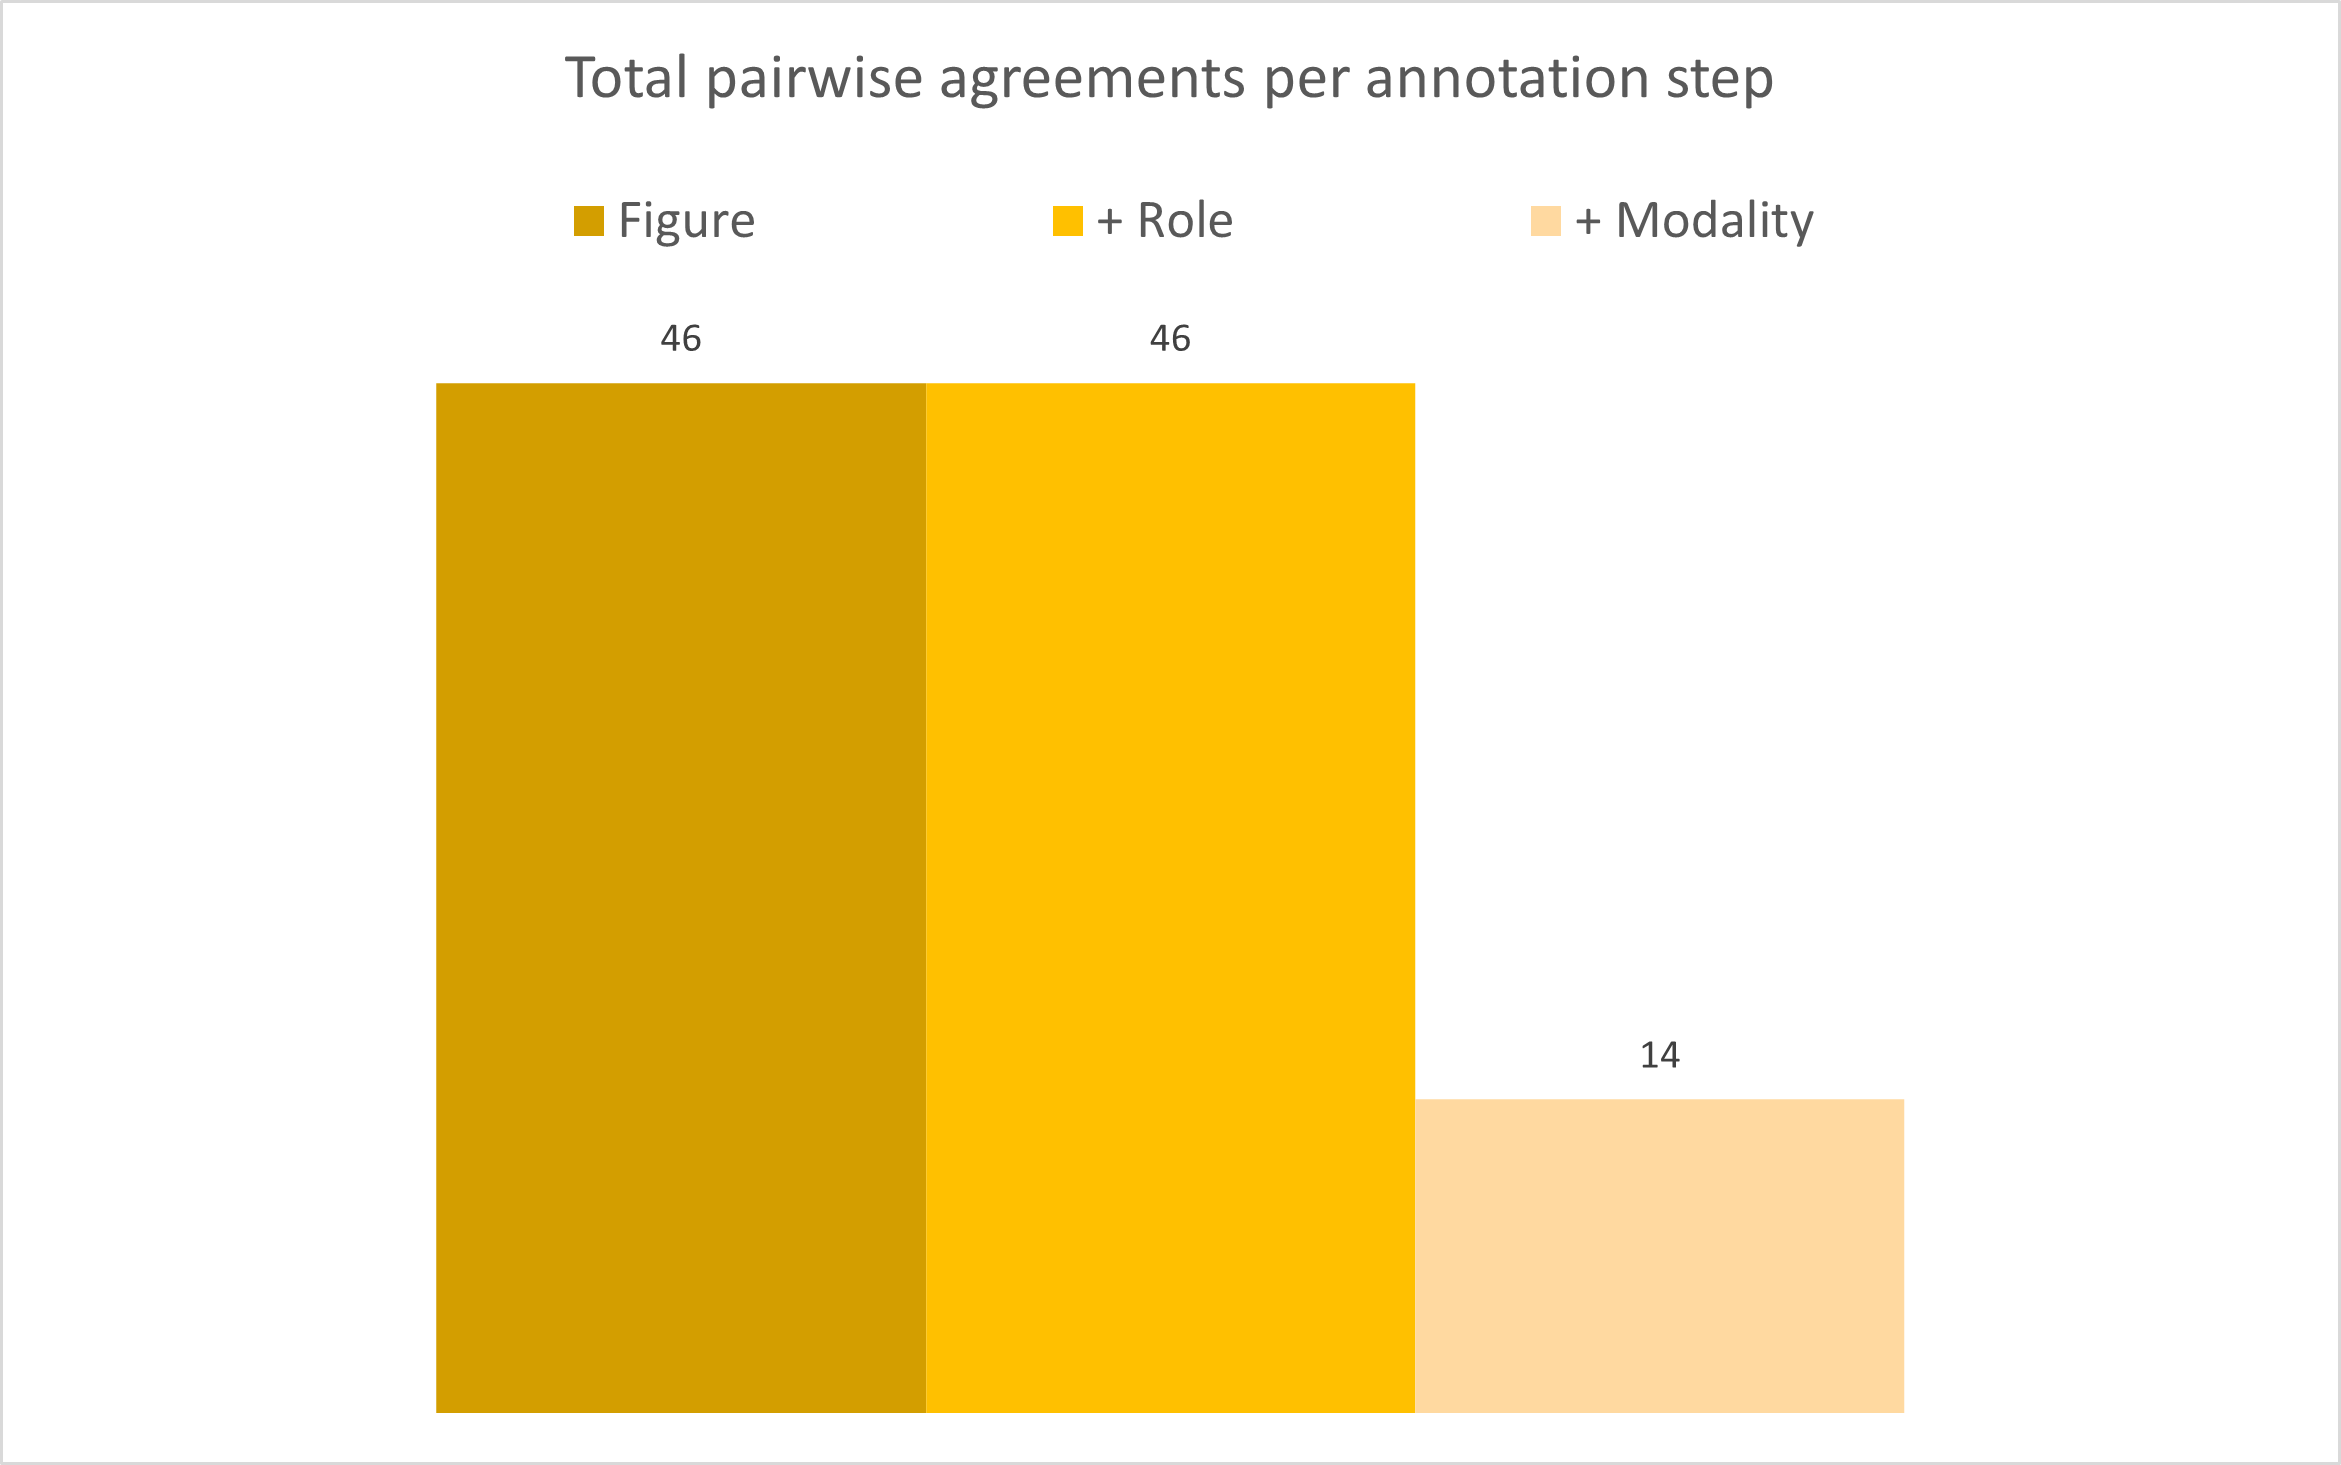 The bar chart shows the change in pairwise agreement of the groups with the inclusion of annotation stepsThe bar chart shows the change in pairwise agreement of the groups with the inclusion of annotation steps